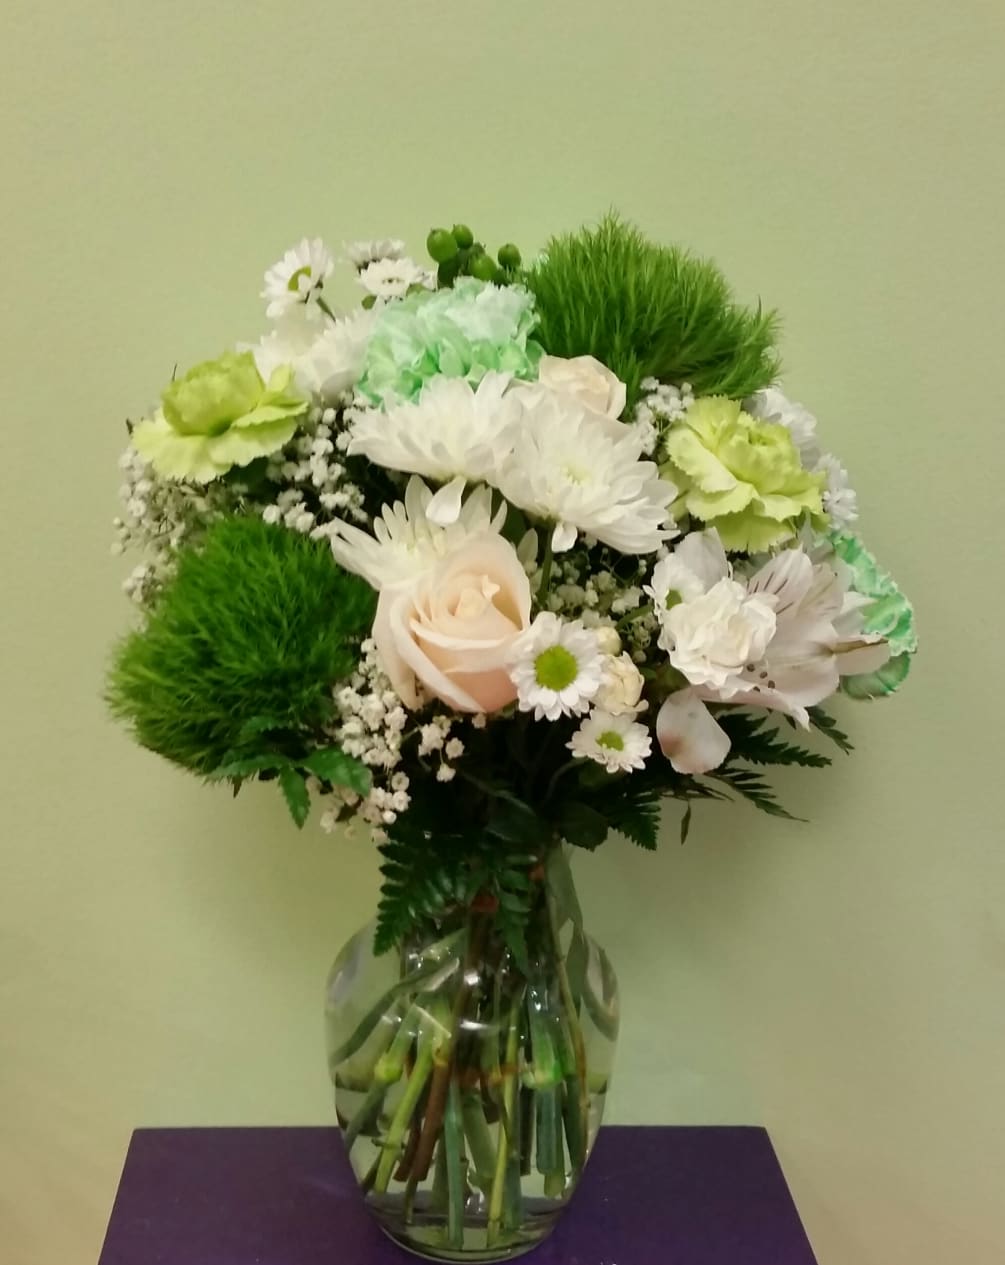 This is an exotic green and white arrangement that is filled with